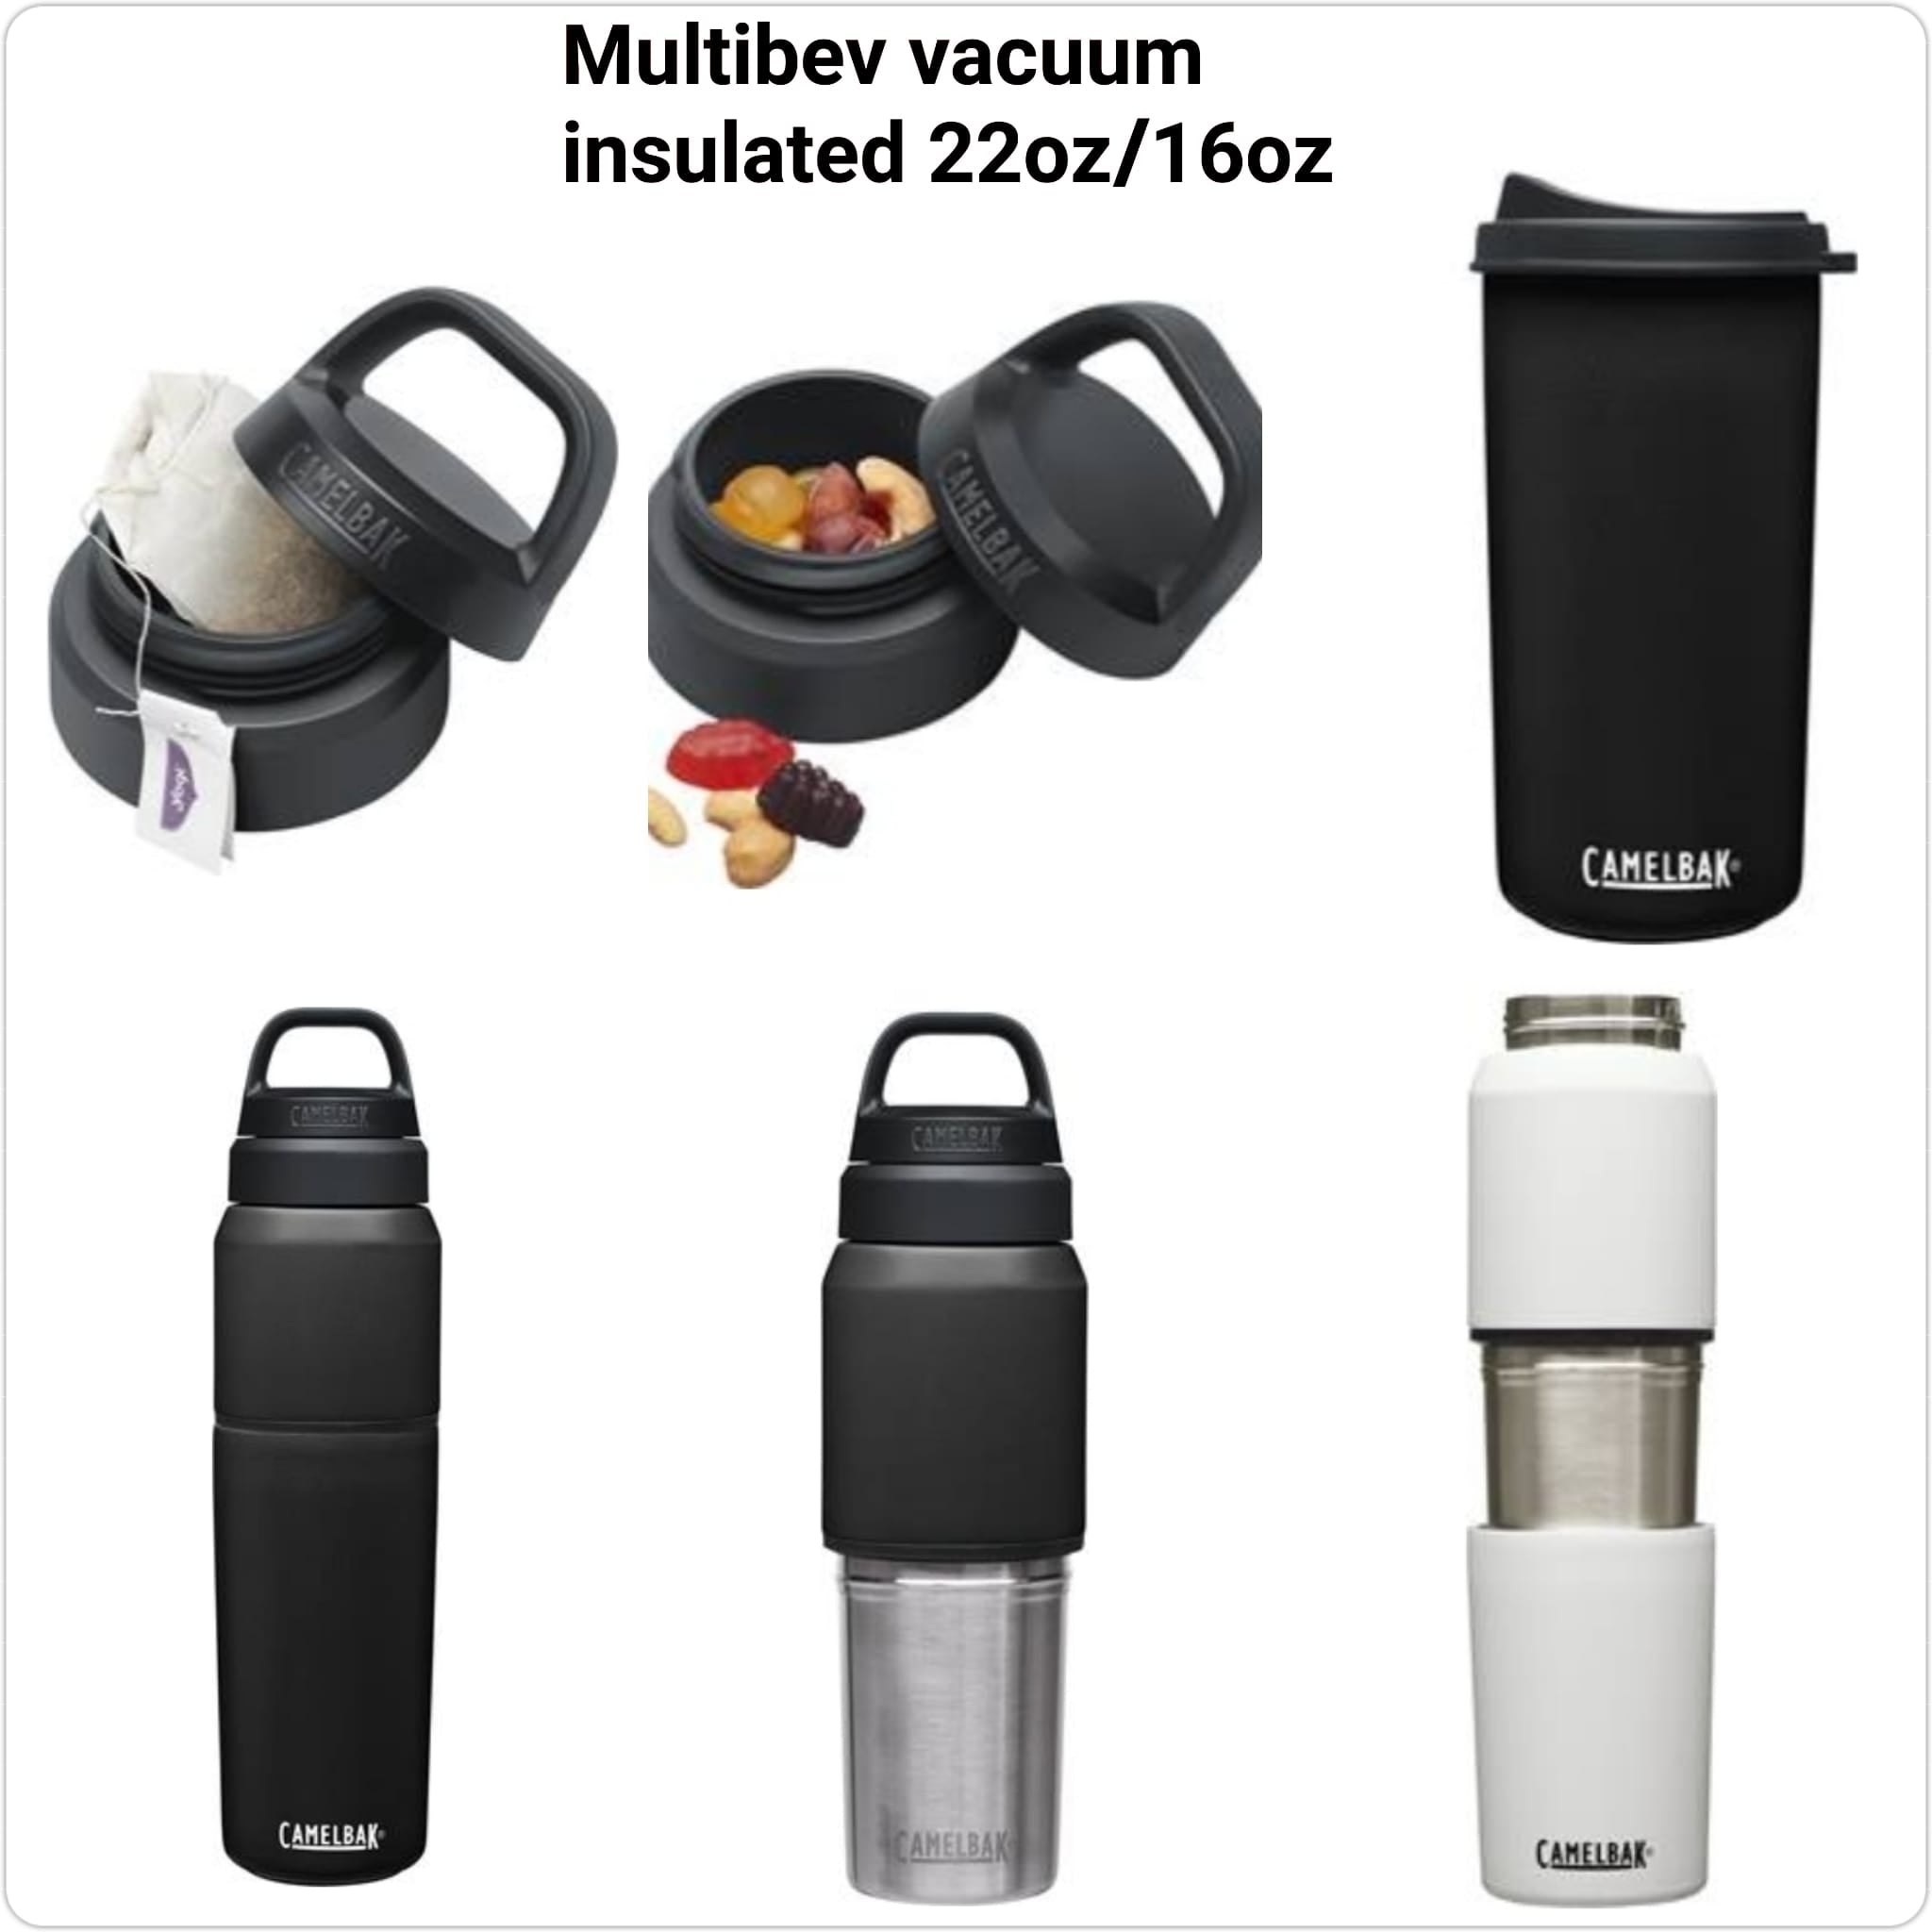 CamelBak Hot Cap 350ml Vacuum Insulated Stainless Steel by